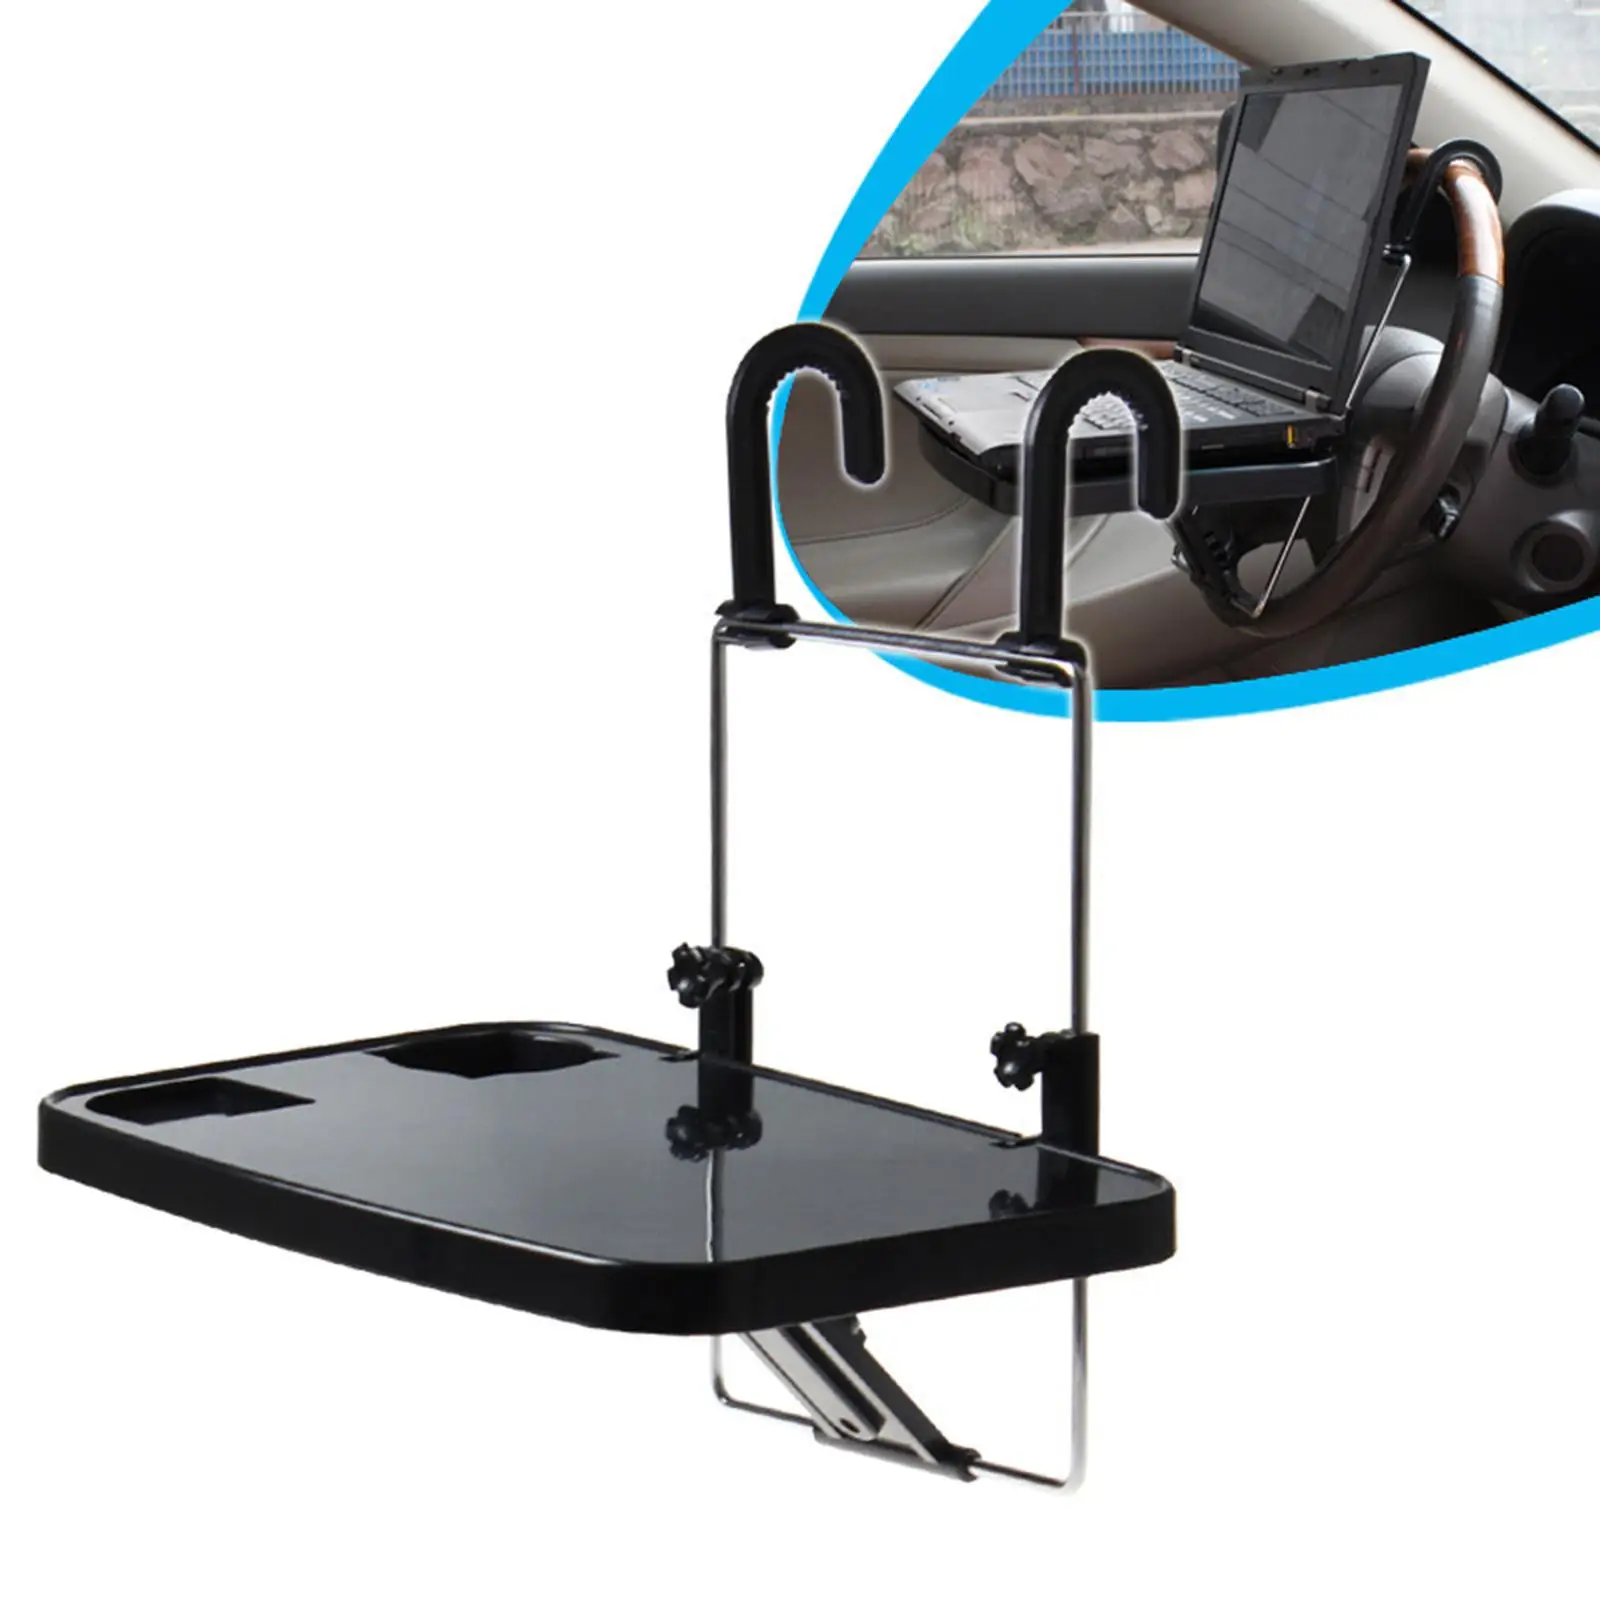 Car Computer Rack Tray Table Desk Table Portable Fold Mount Fits for Kids PC